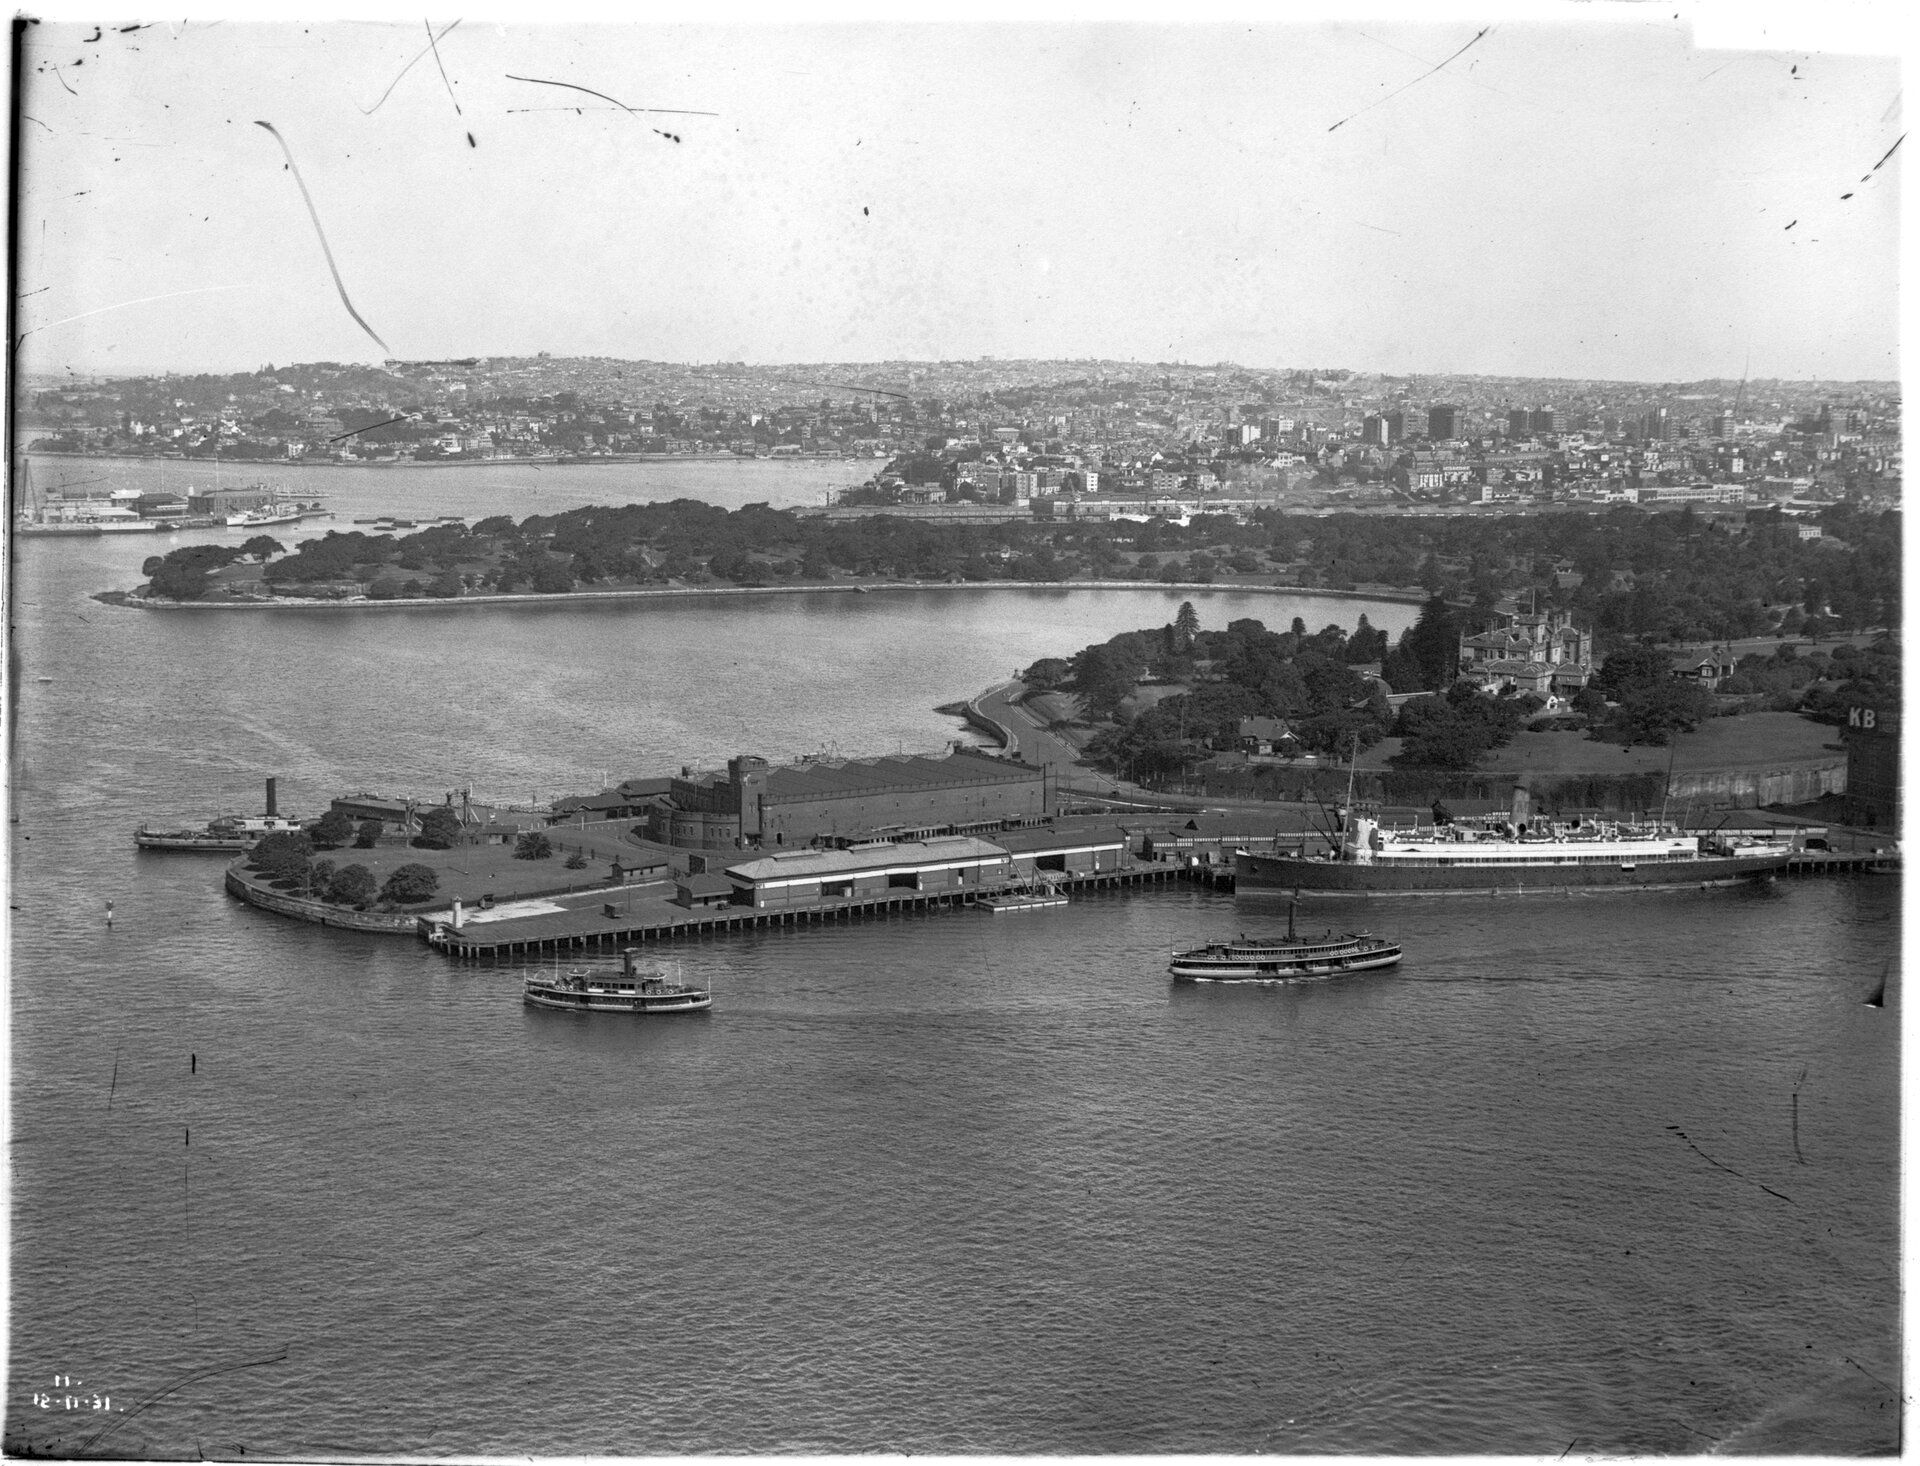 Circular Quay in 1931 showing the tram depot at Bennelong Point, before the Opera House was built